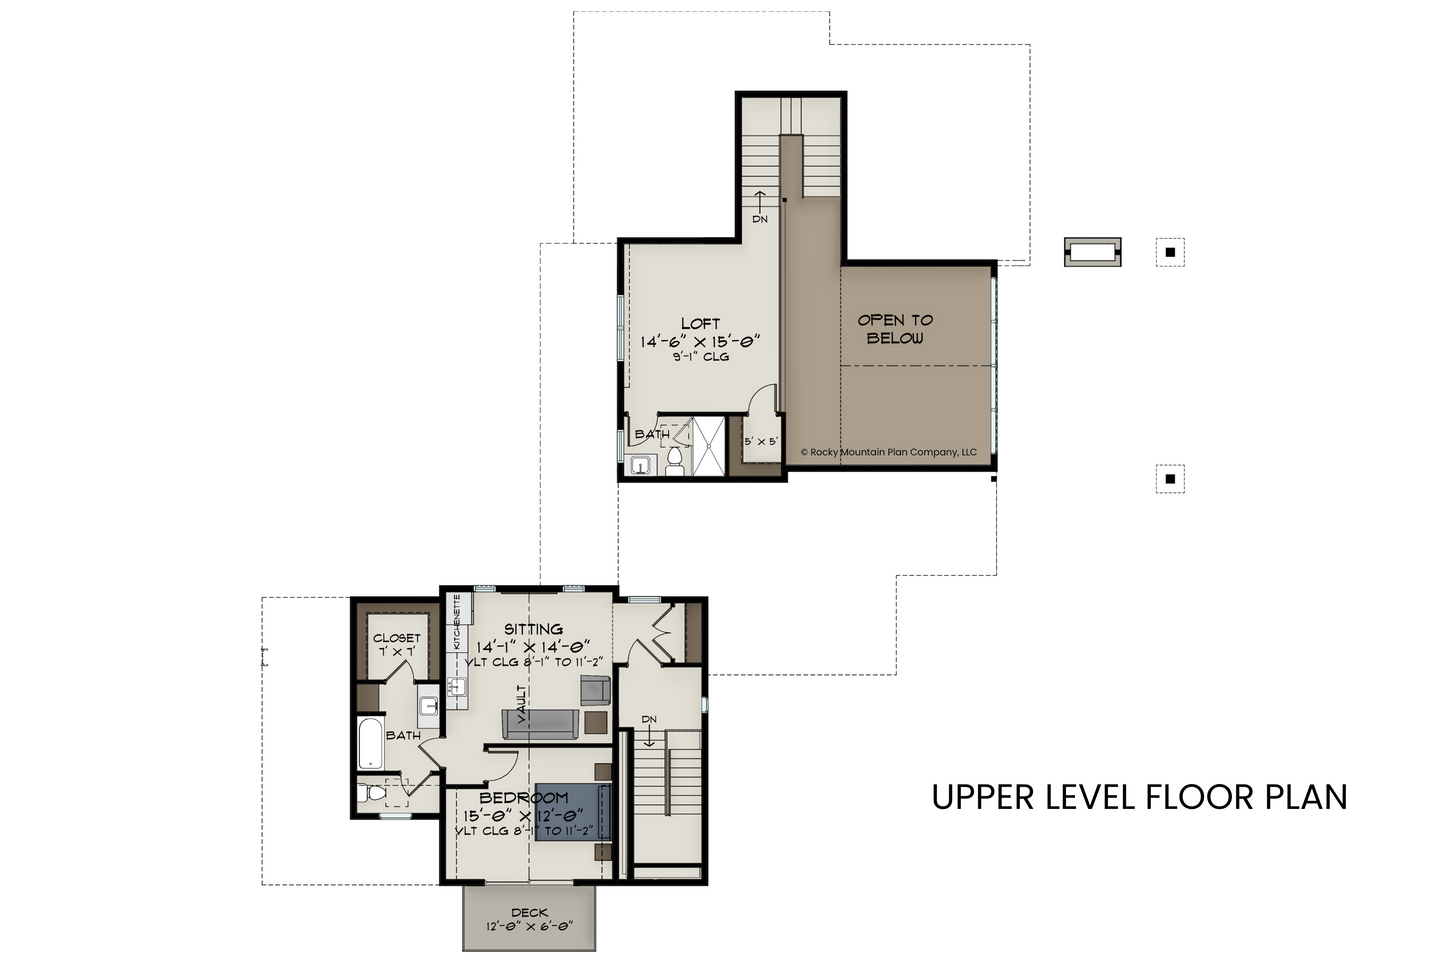 Ultimate-Vacation-Lodge-Plan-with-Guest-Suites-Upper-Level-Floor-Plan-Rocky-Mountain-Plan-Company-Meadow-Creek